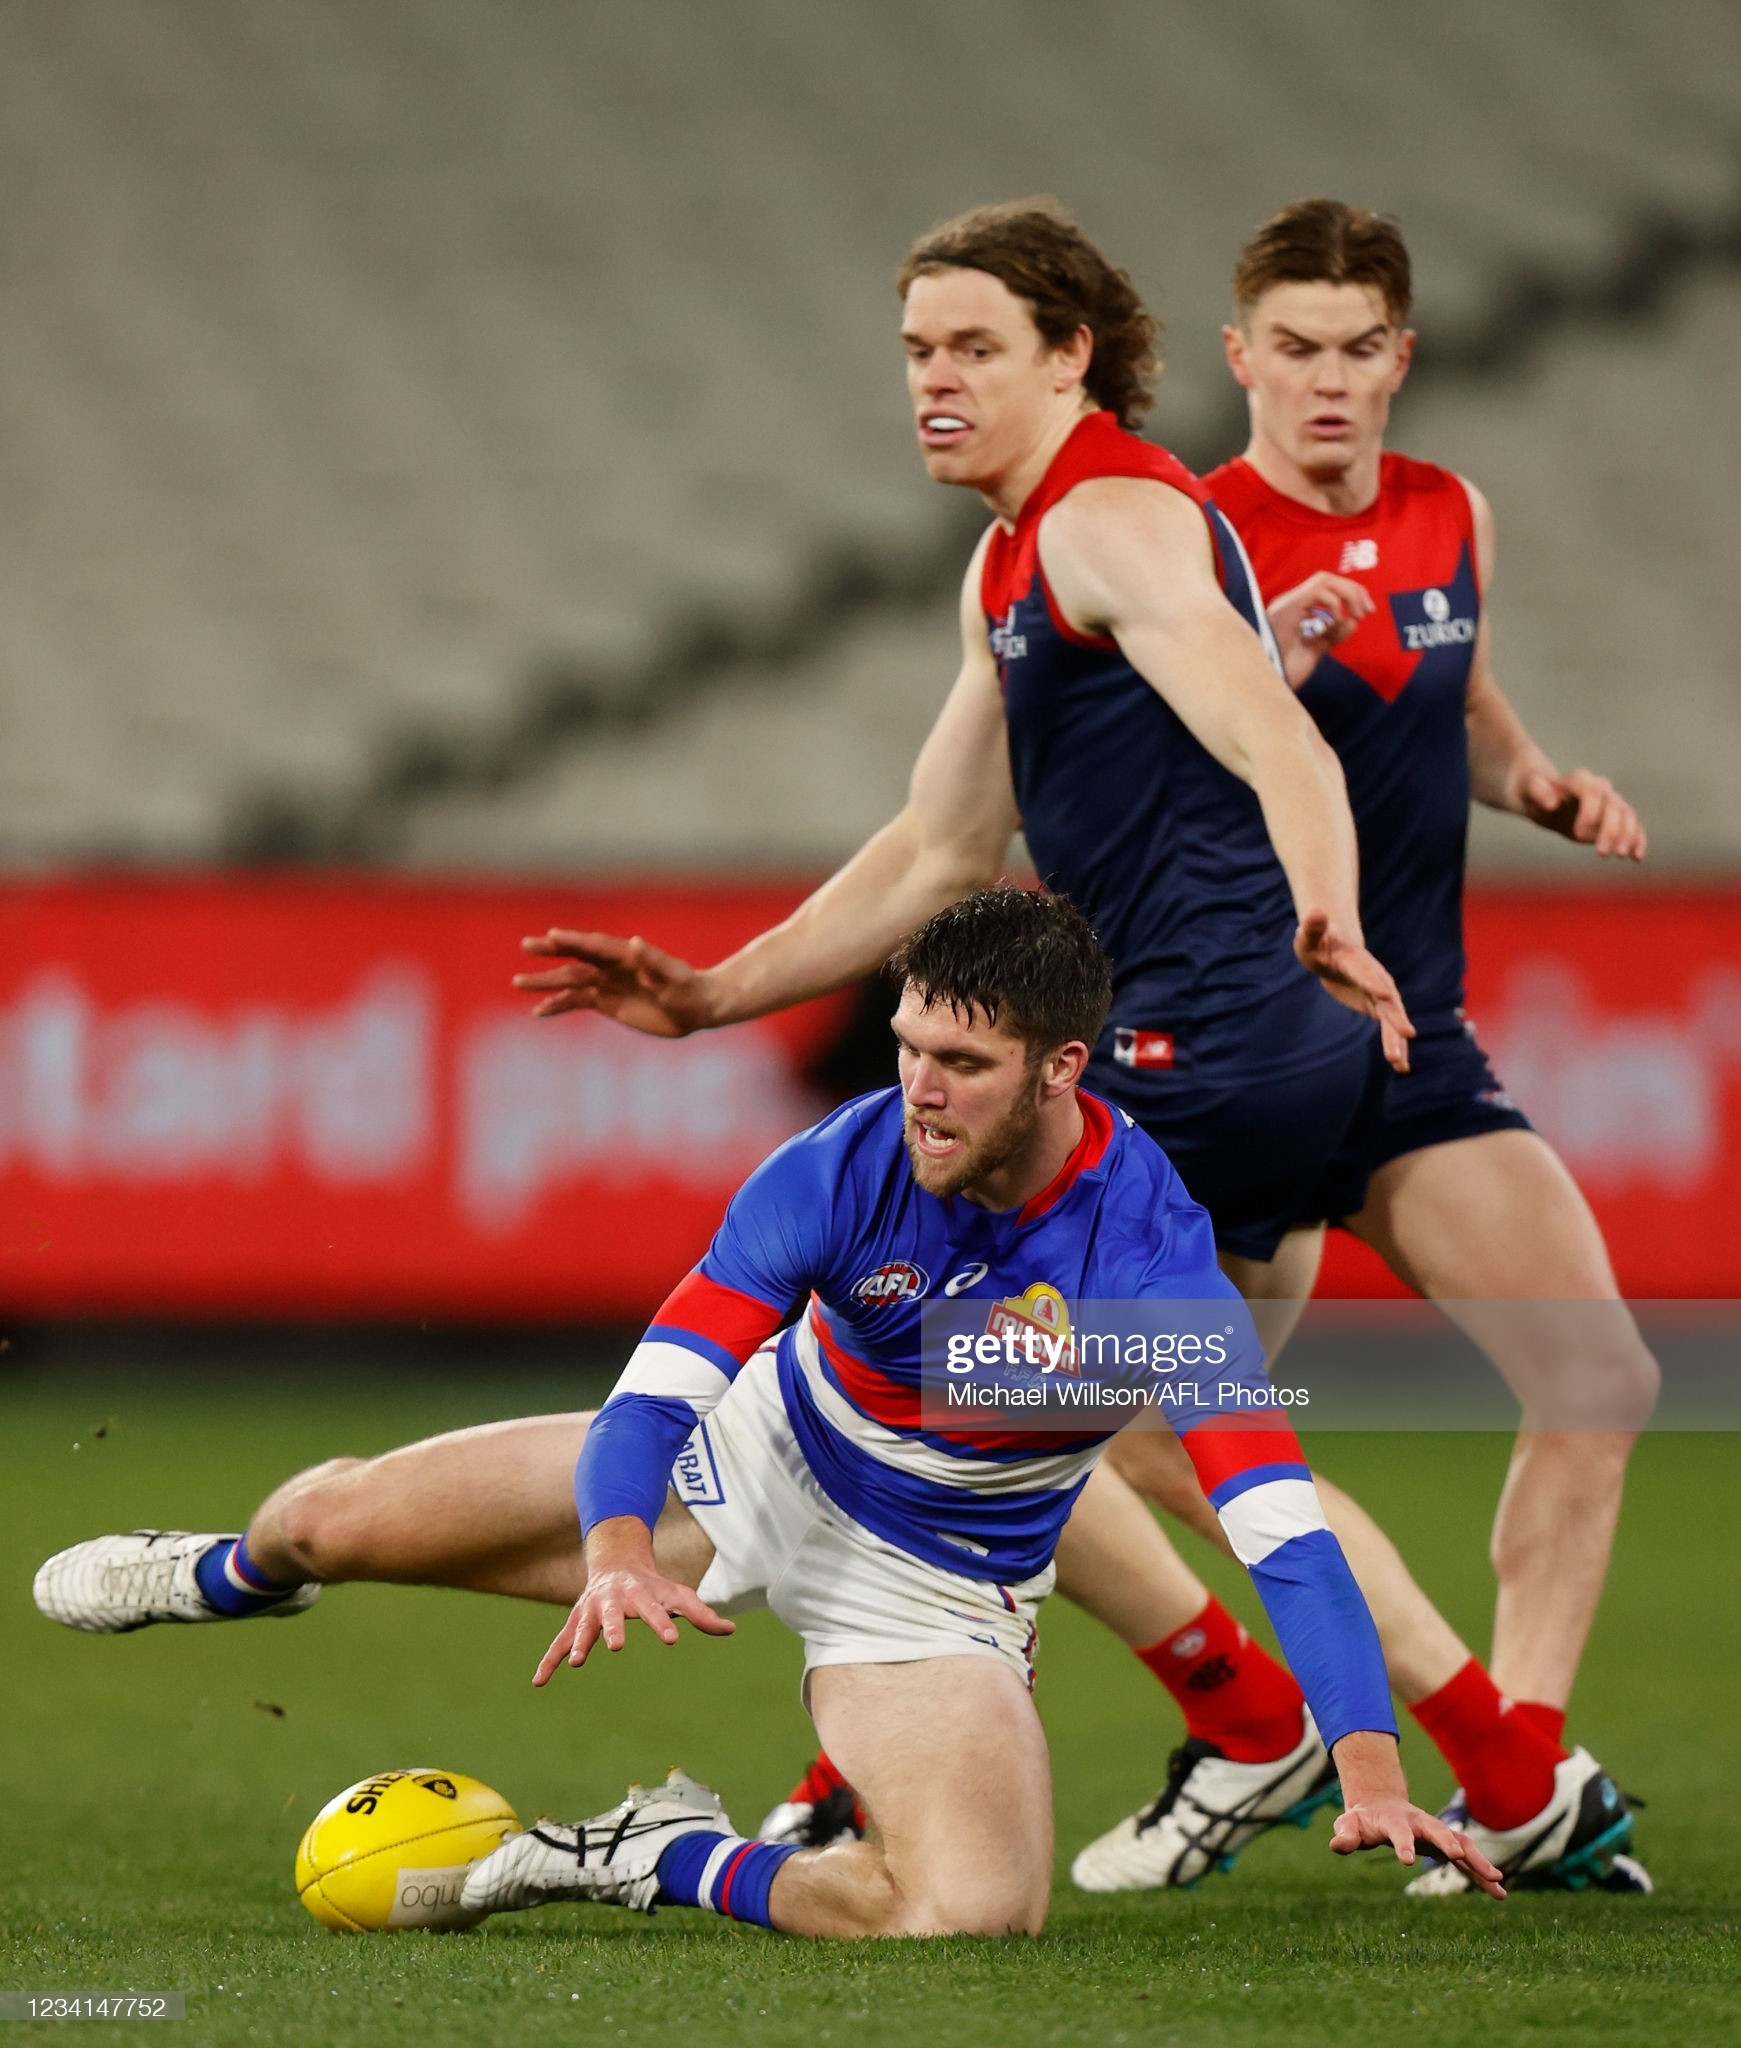 bailey-williams-of-the-bulldogs-in-action-during-the-2021-afl-round-picture-id1234147752